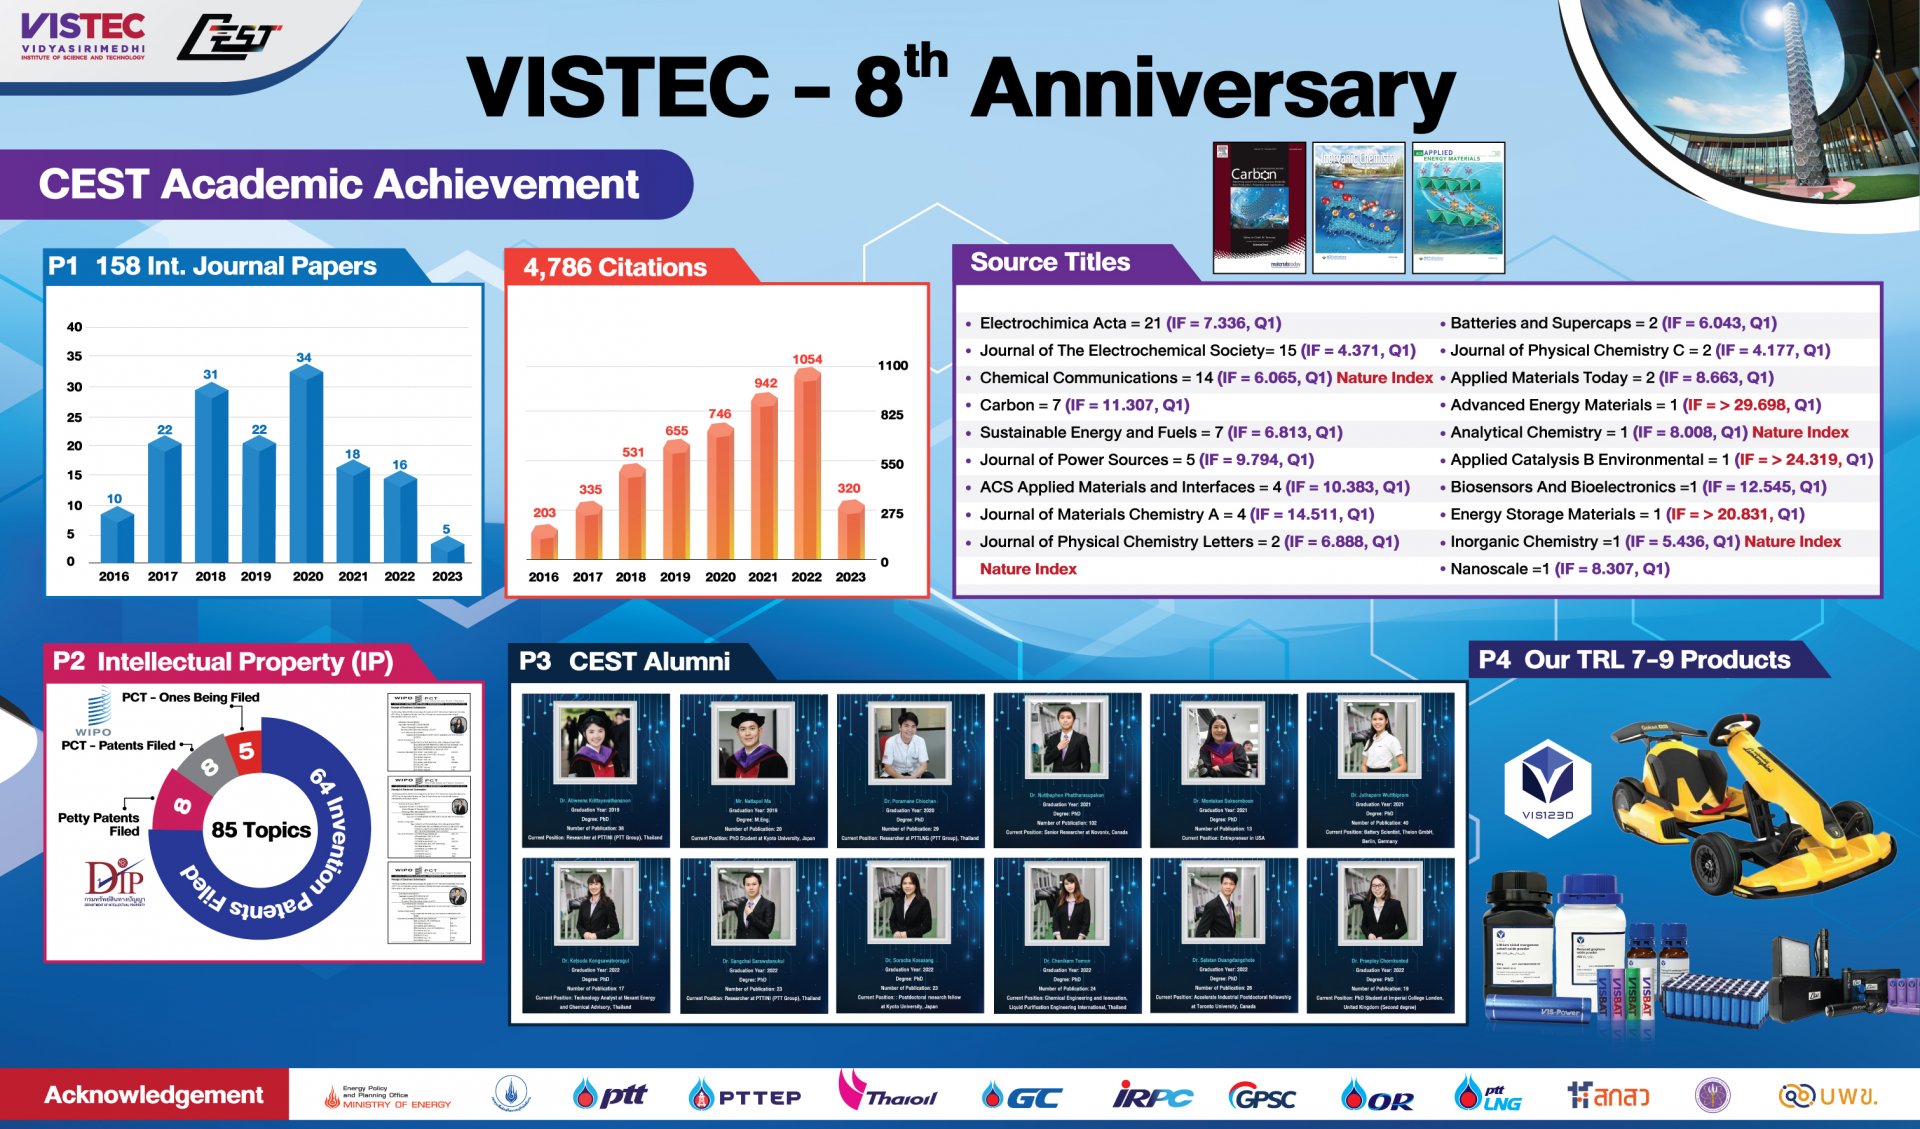 To celebrate VISTEC-8th Anniversary, here is our academic achievement according to 4Ps policy of Vistec.